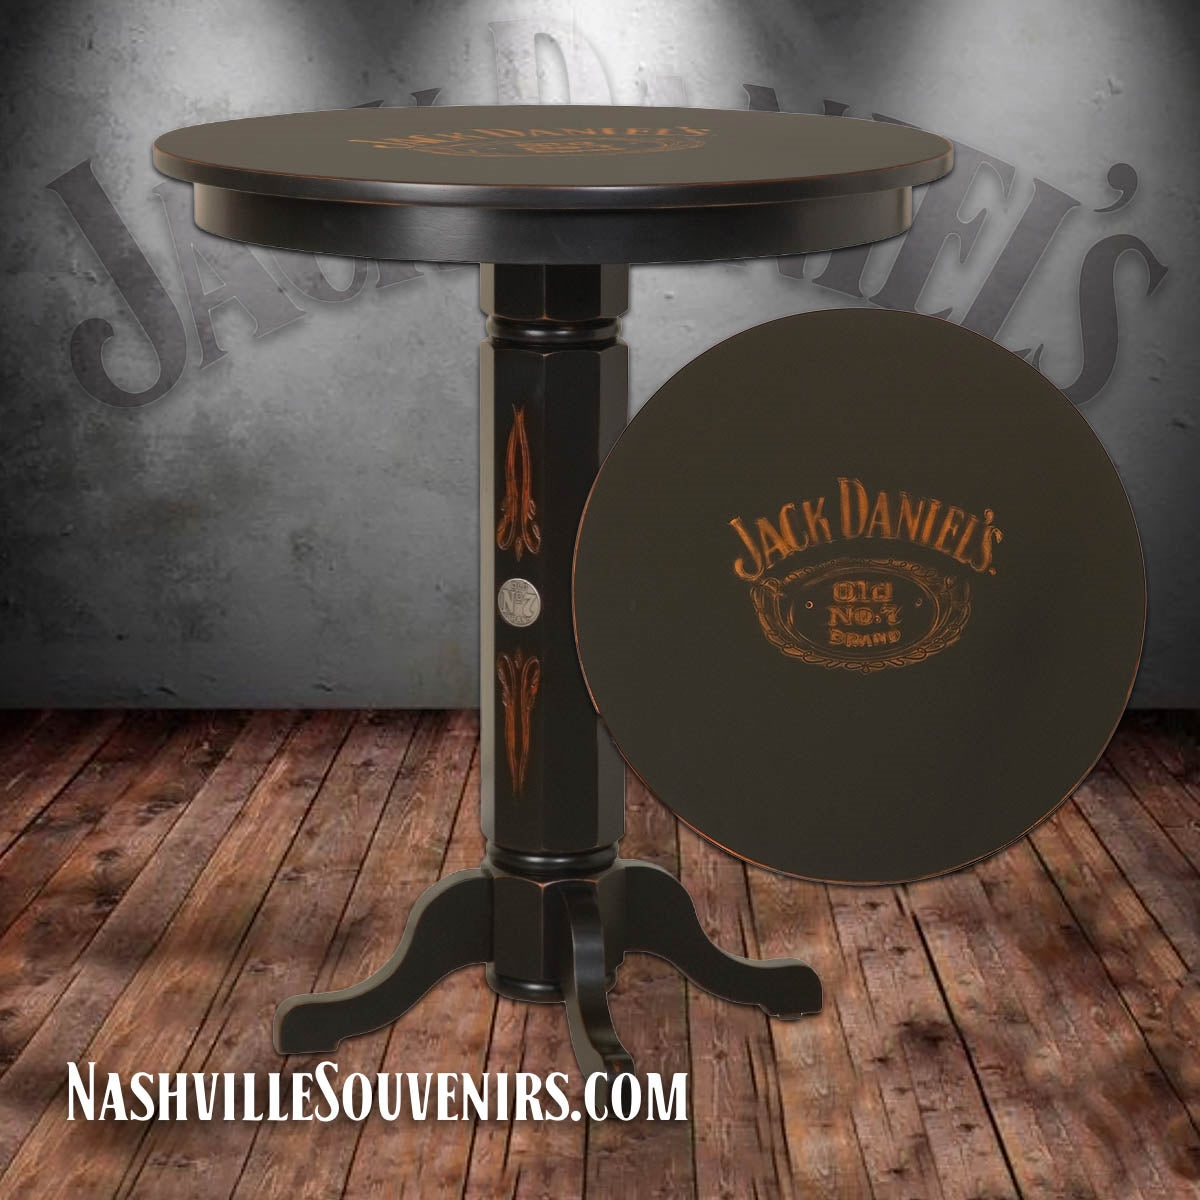 Here's a another great addition for your Jack Daniel's man cave. This Jack Daniel's Pub table is made from selected hardwoods and hand rubbed in the Tennessee charcoal finish. The distressed look and finish are really beautiful.